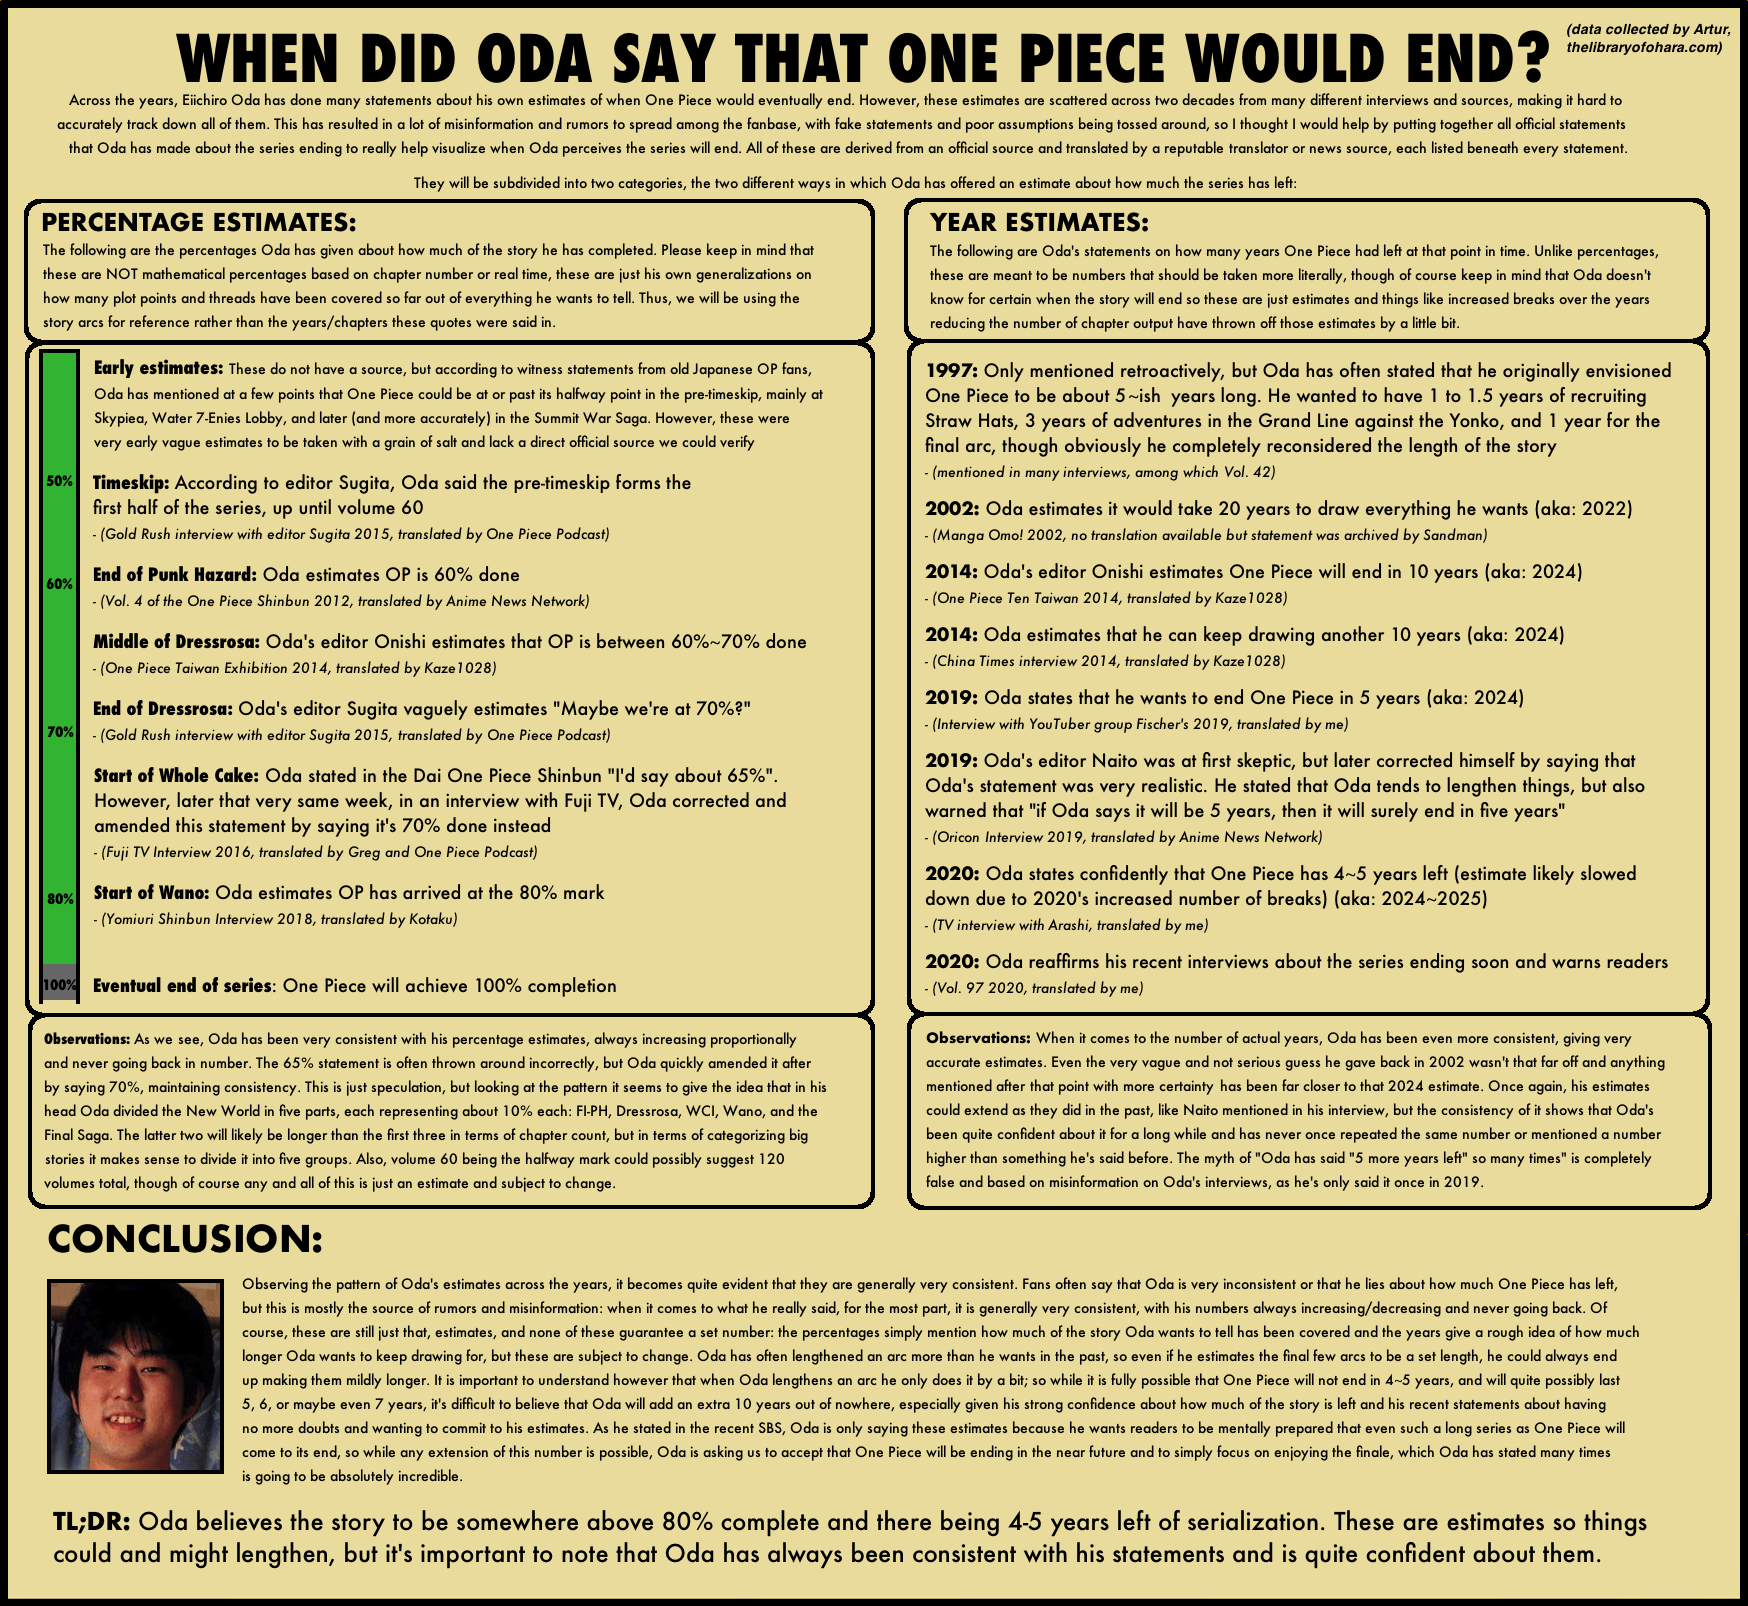 Artur Library Of Ohara There S A Lot Of Misinformation About Oda S Statements On When One Piece Will End So I Decided To Make A Chart On All Of Oda S